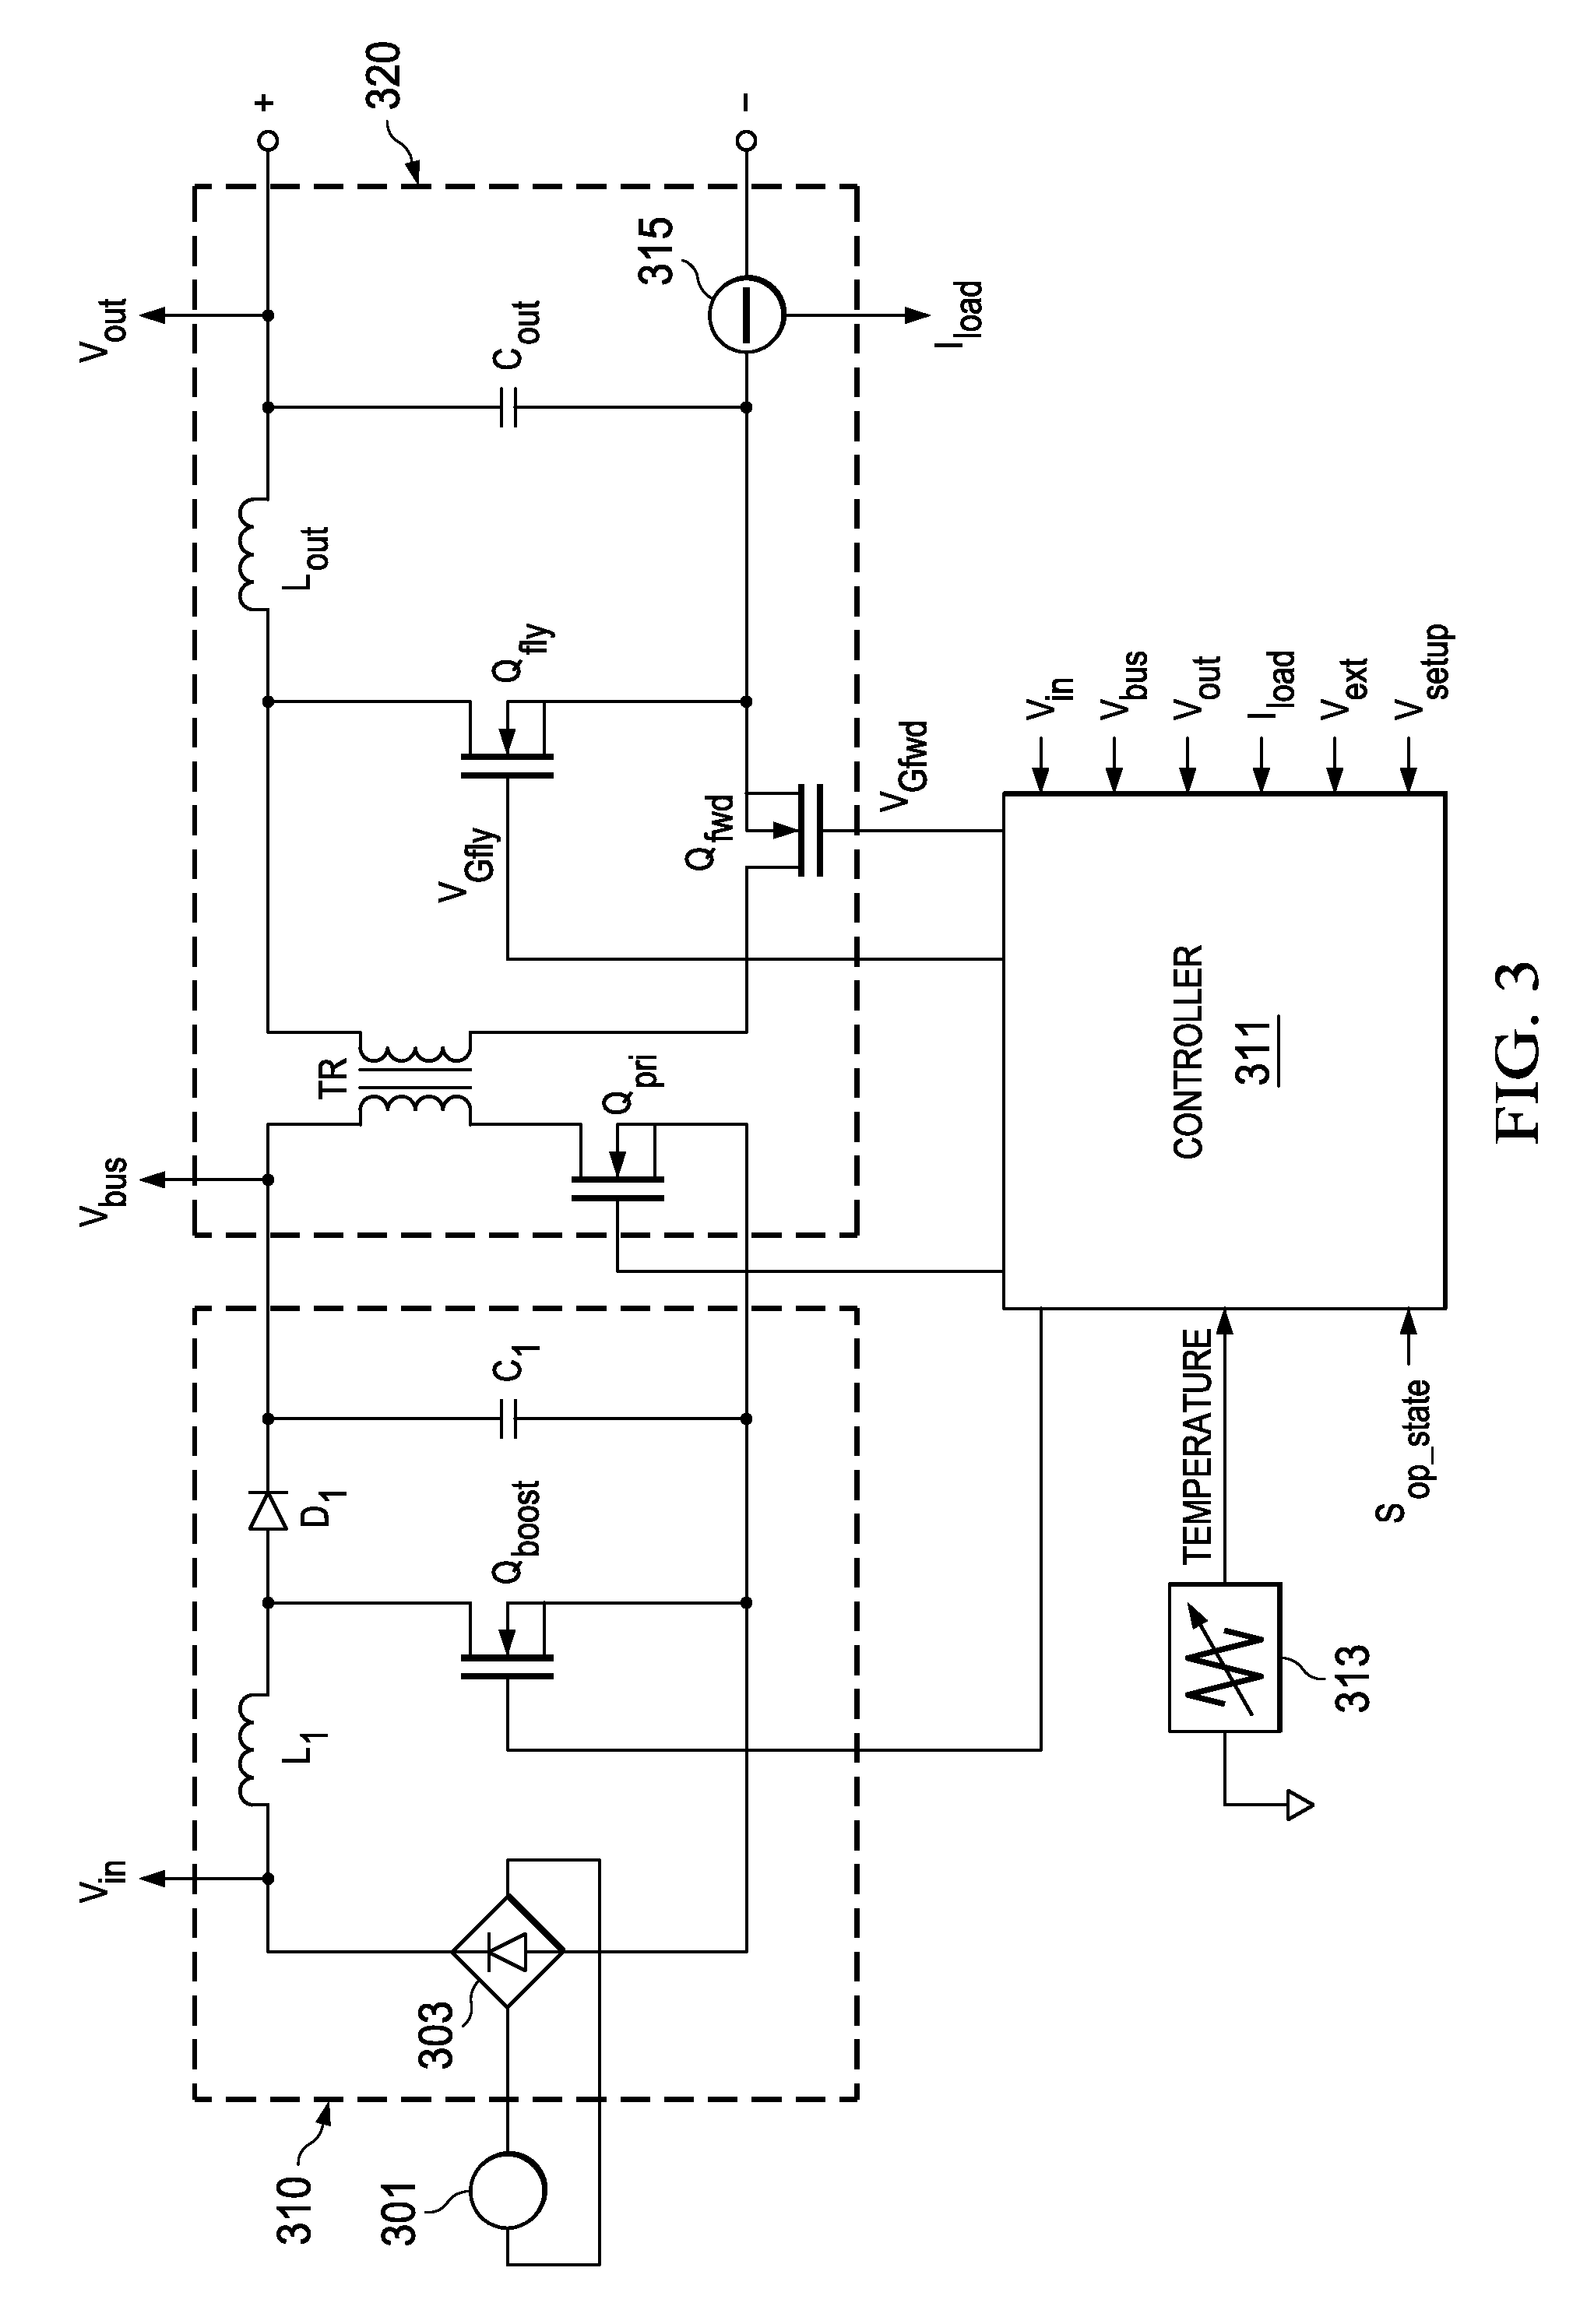 Power system with power converters having an adaptive controller